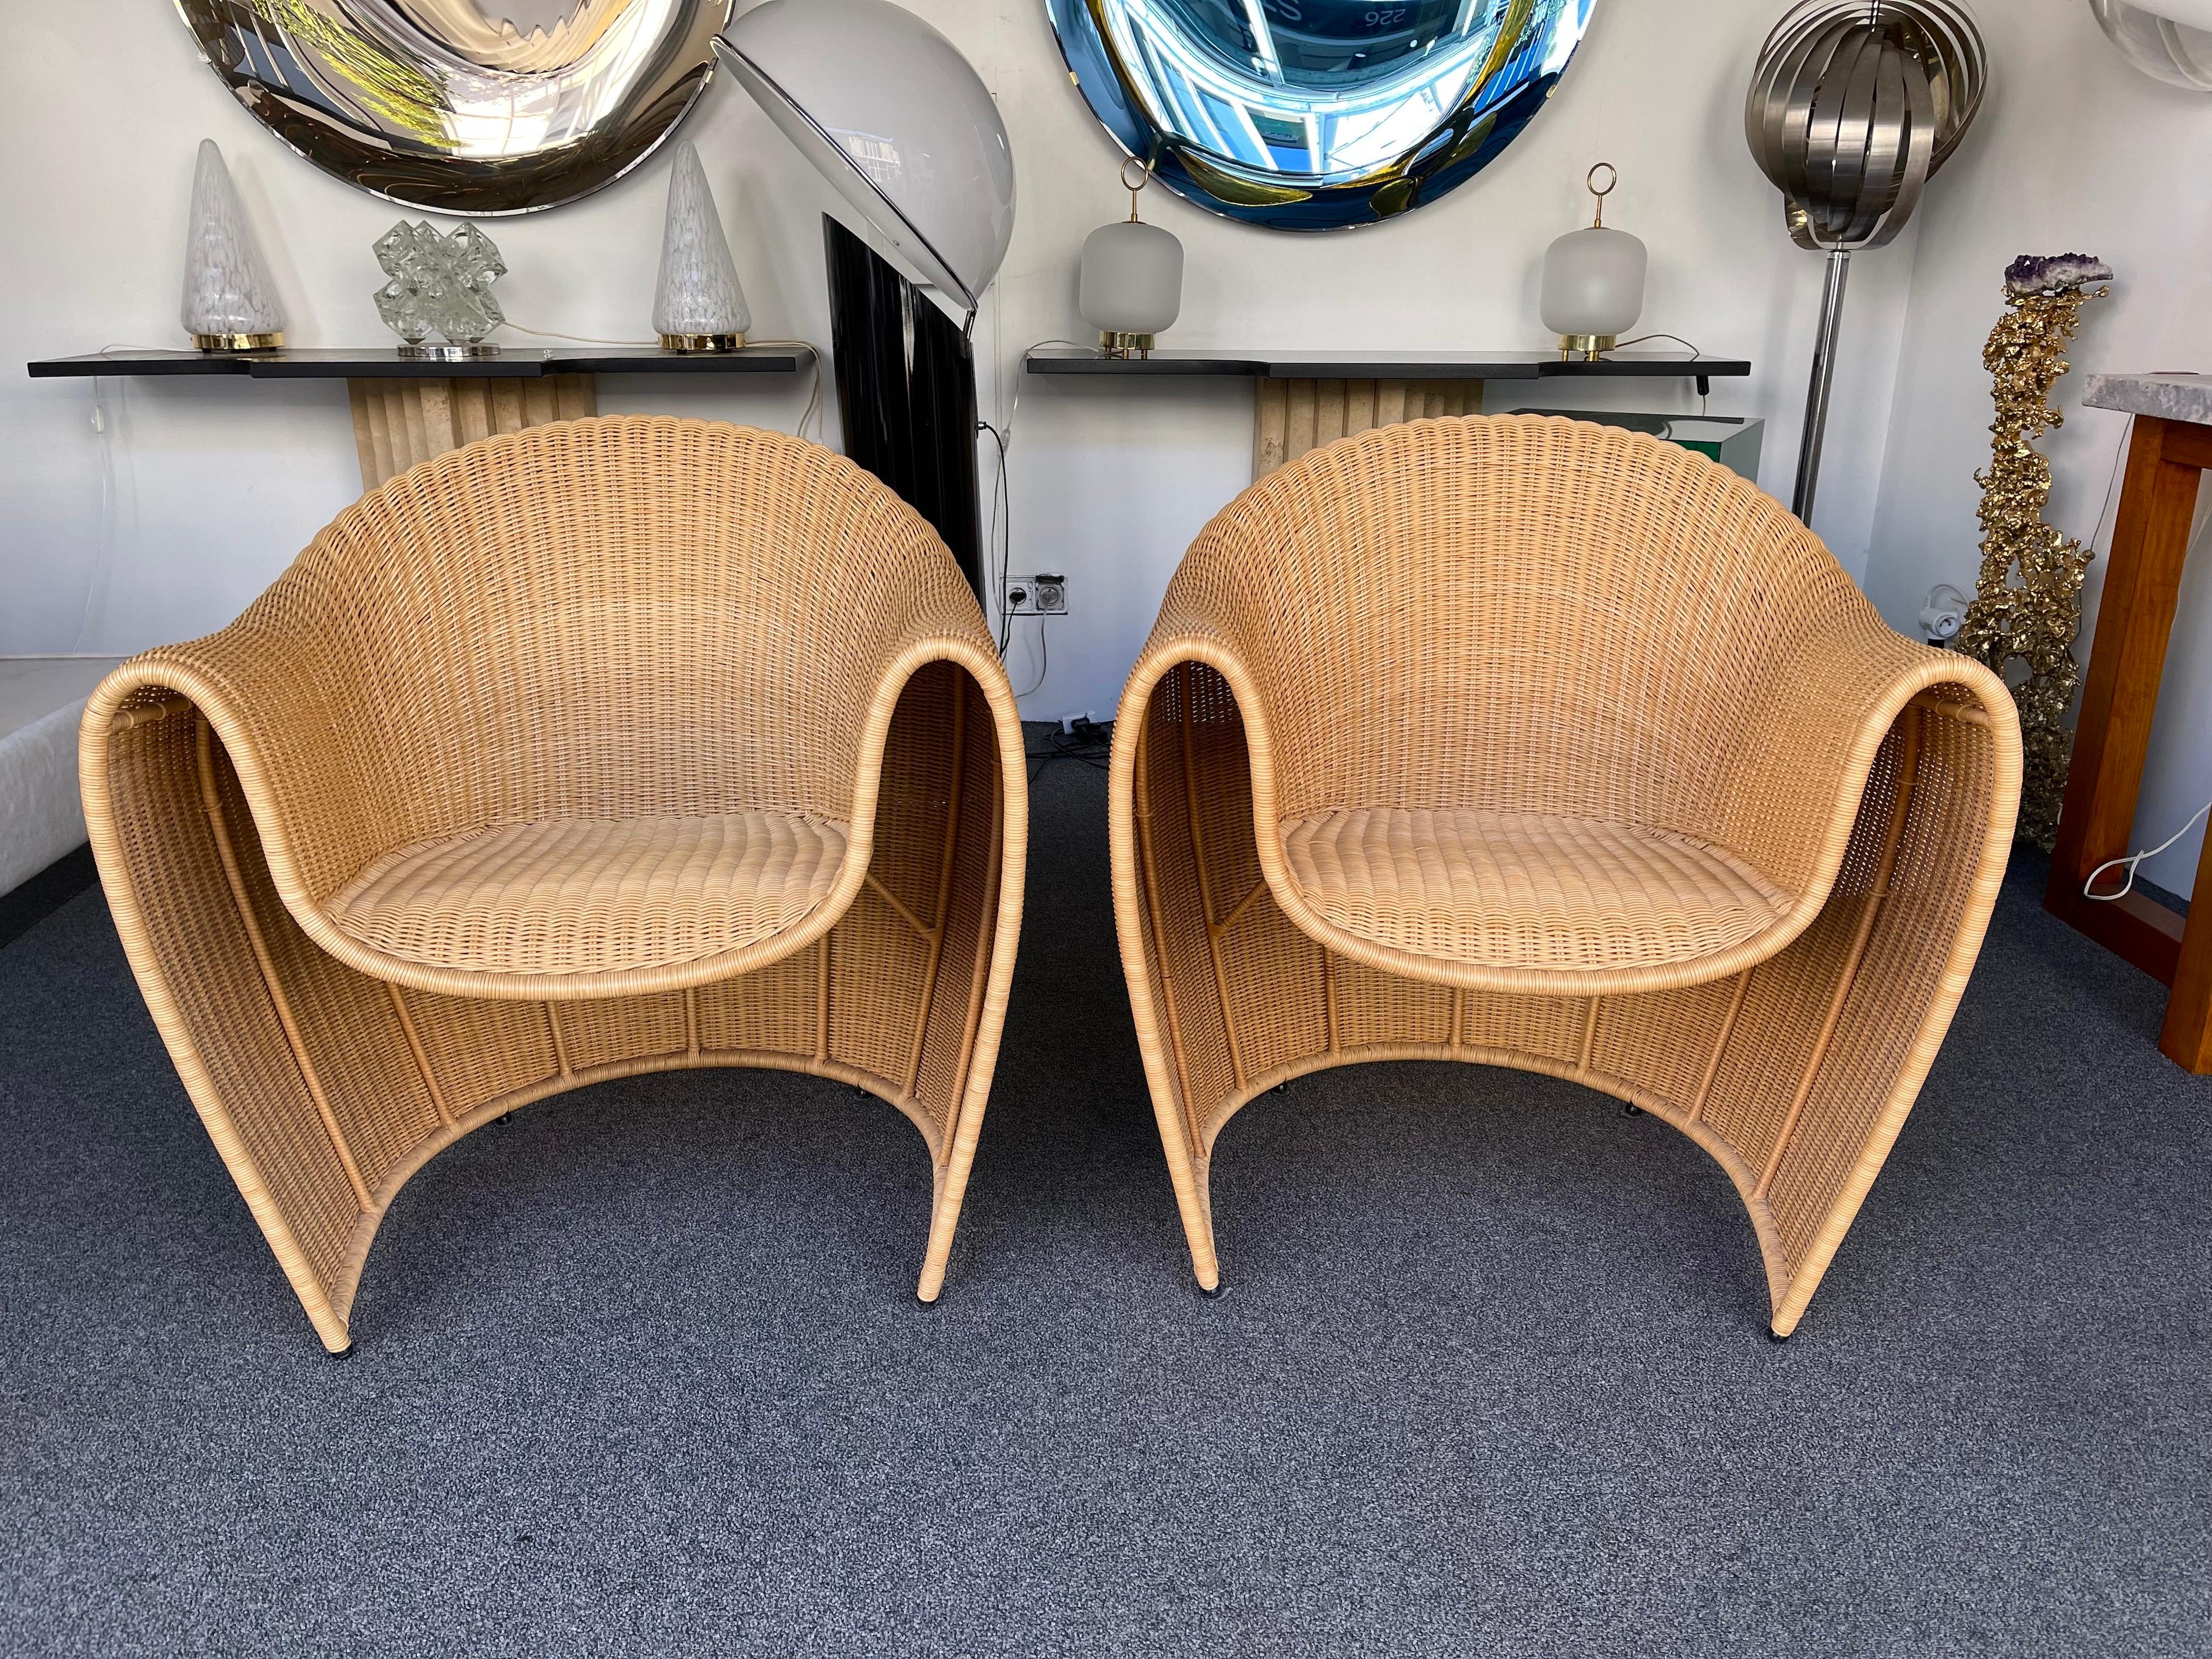 Pair of King Tubby Rattan Armchairs by Platt & Young for Driade, Italy, 1990s For Sale 3